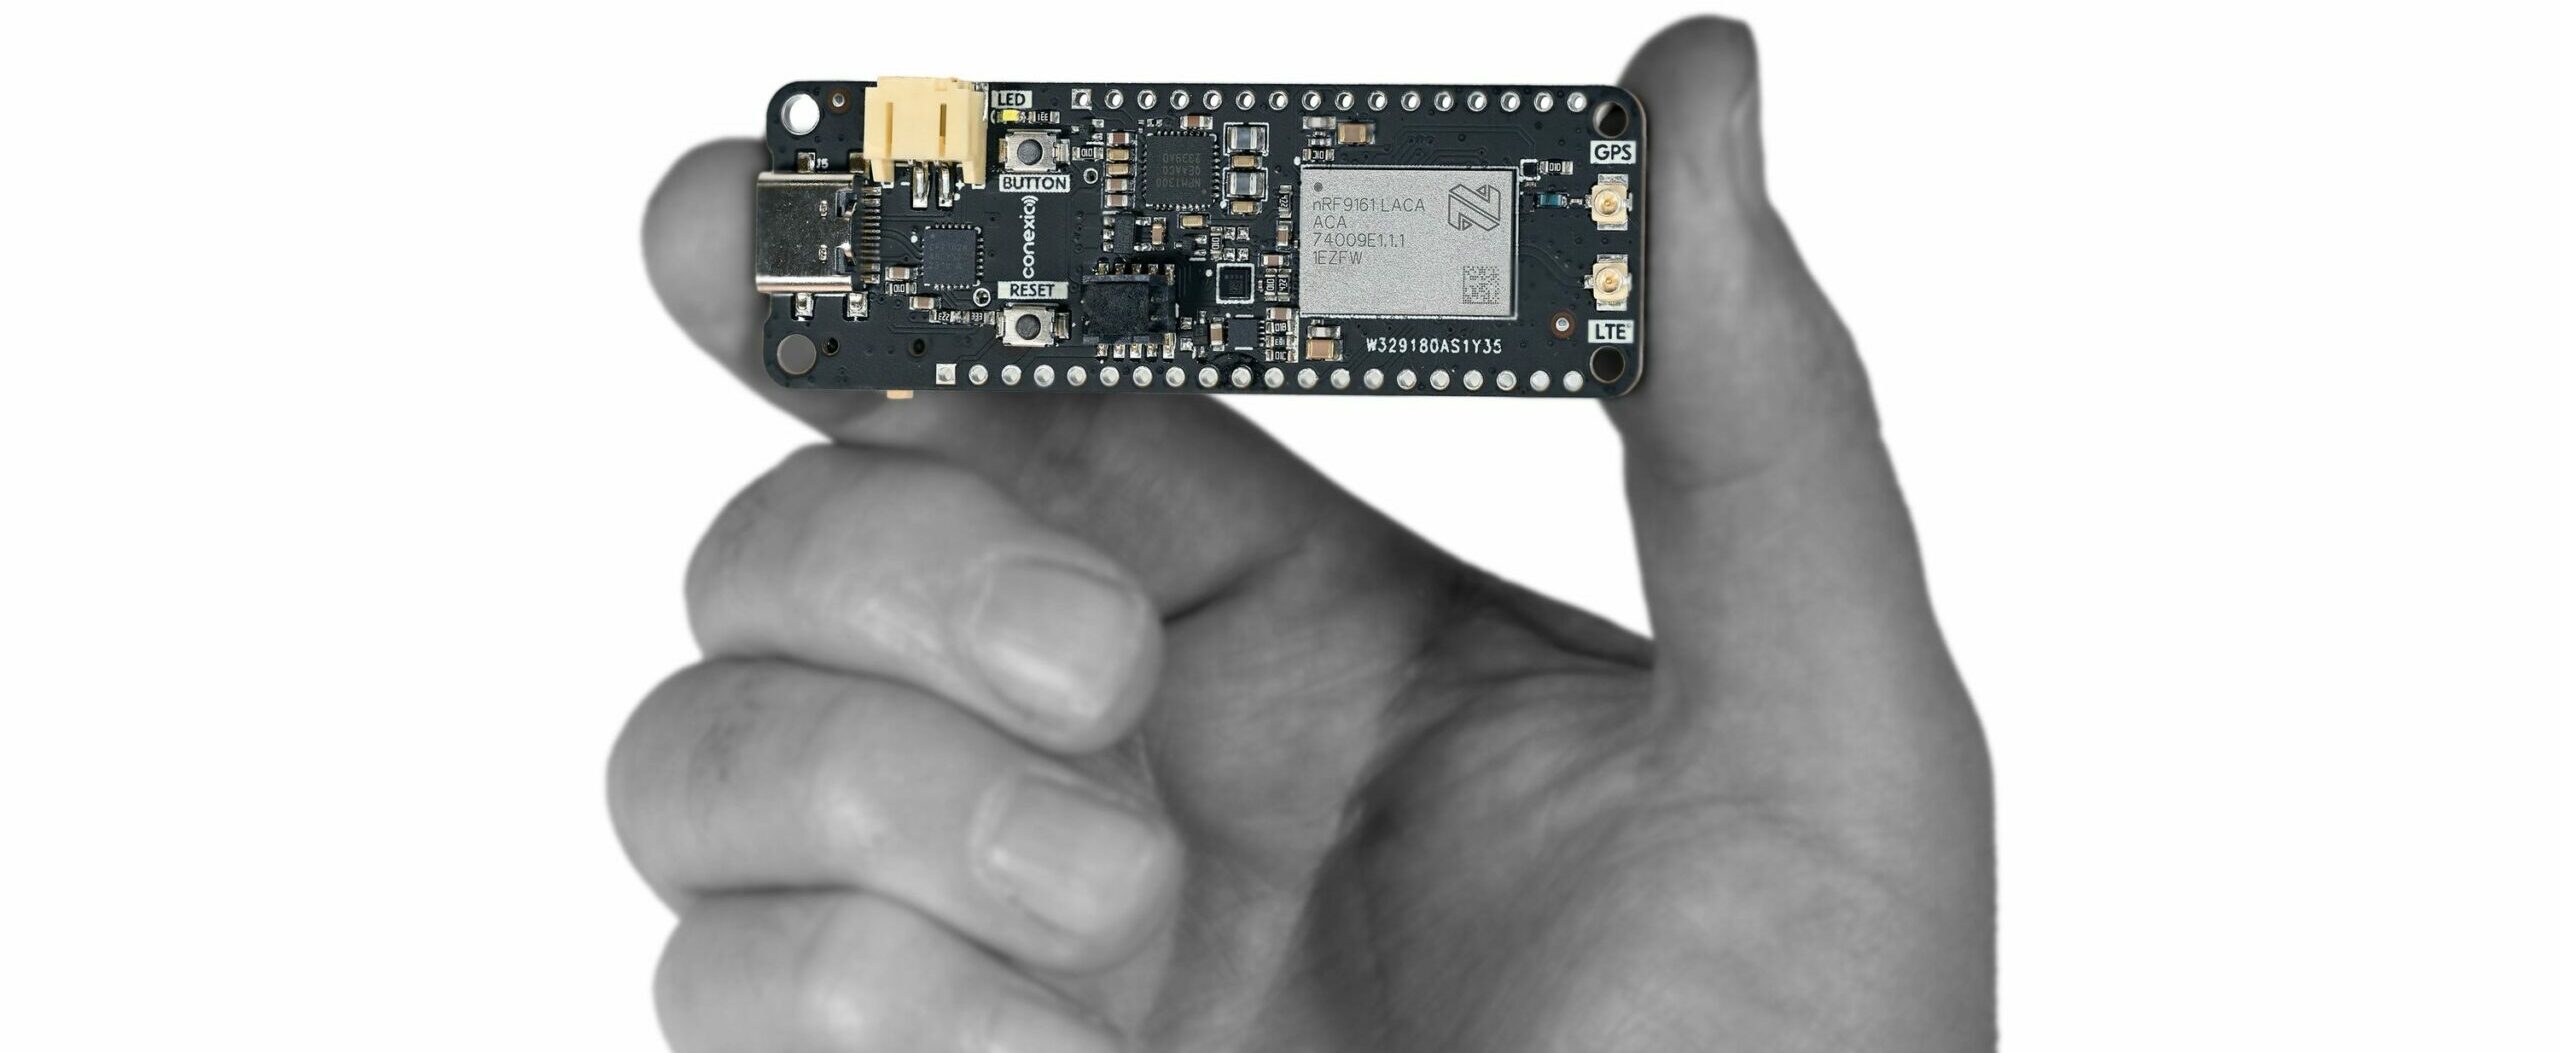 Conexio Stratus Pro- nRF9161 Powered Dev Kit with LTE-IoT, DECT NR+, GNSS and Much More